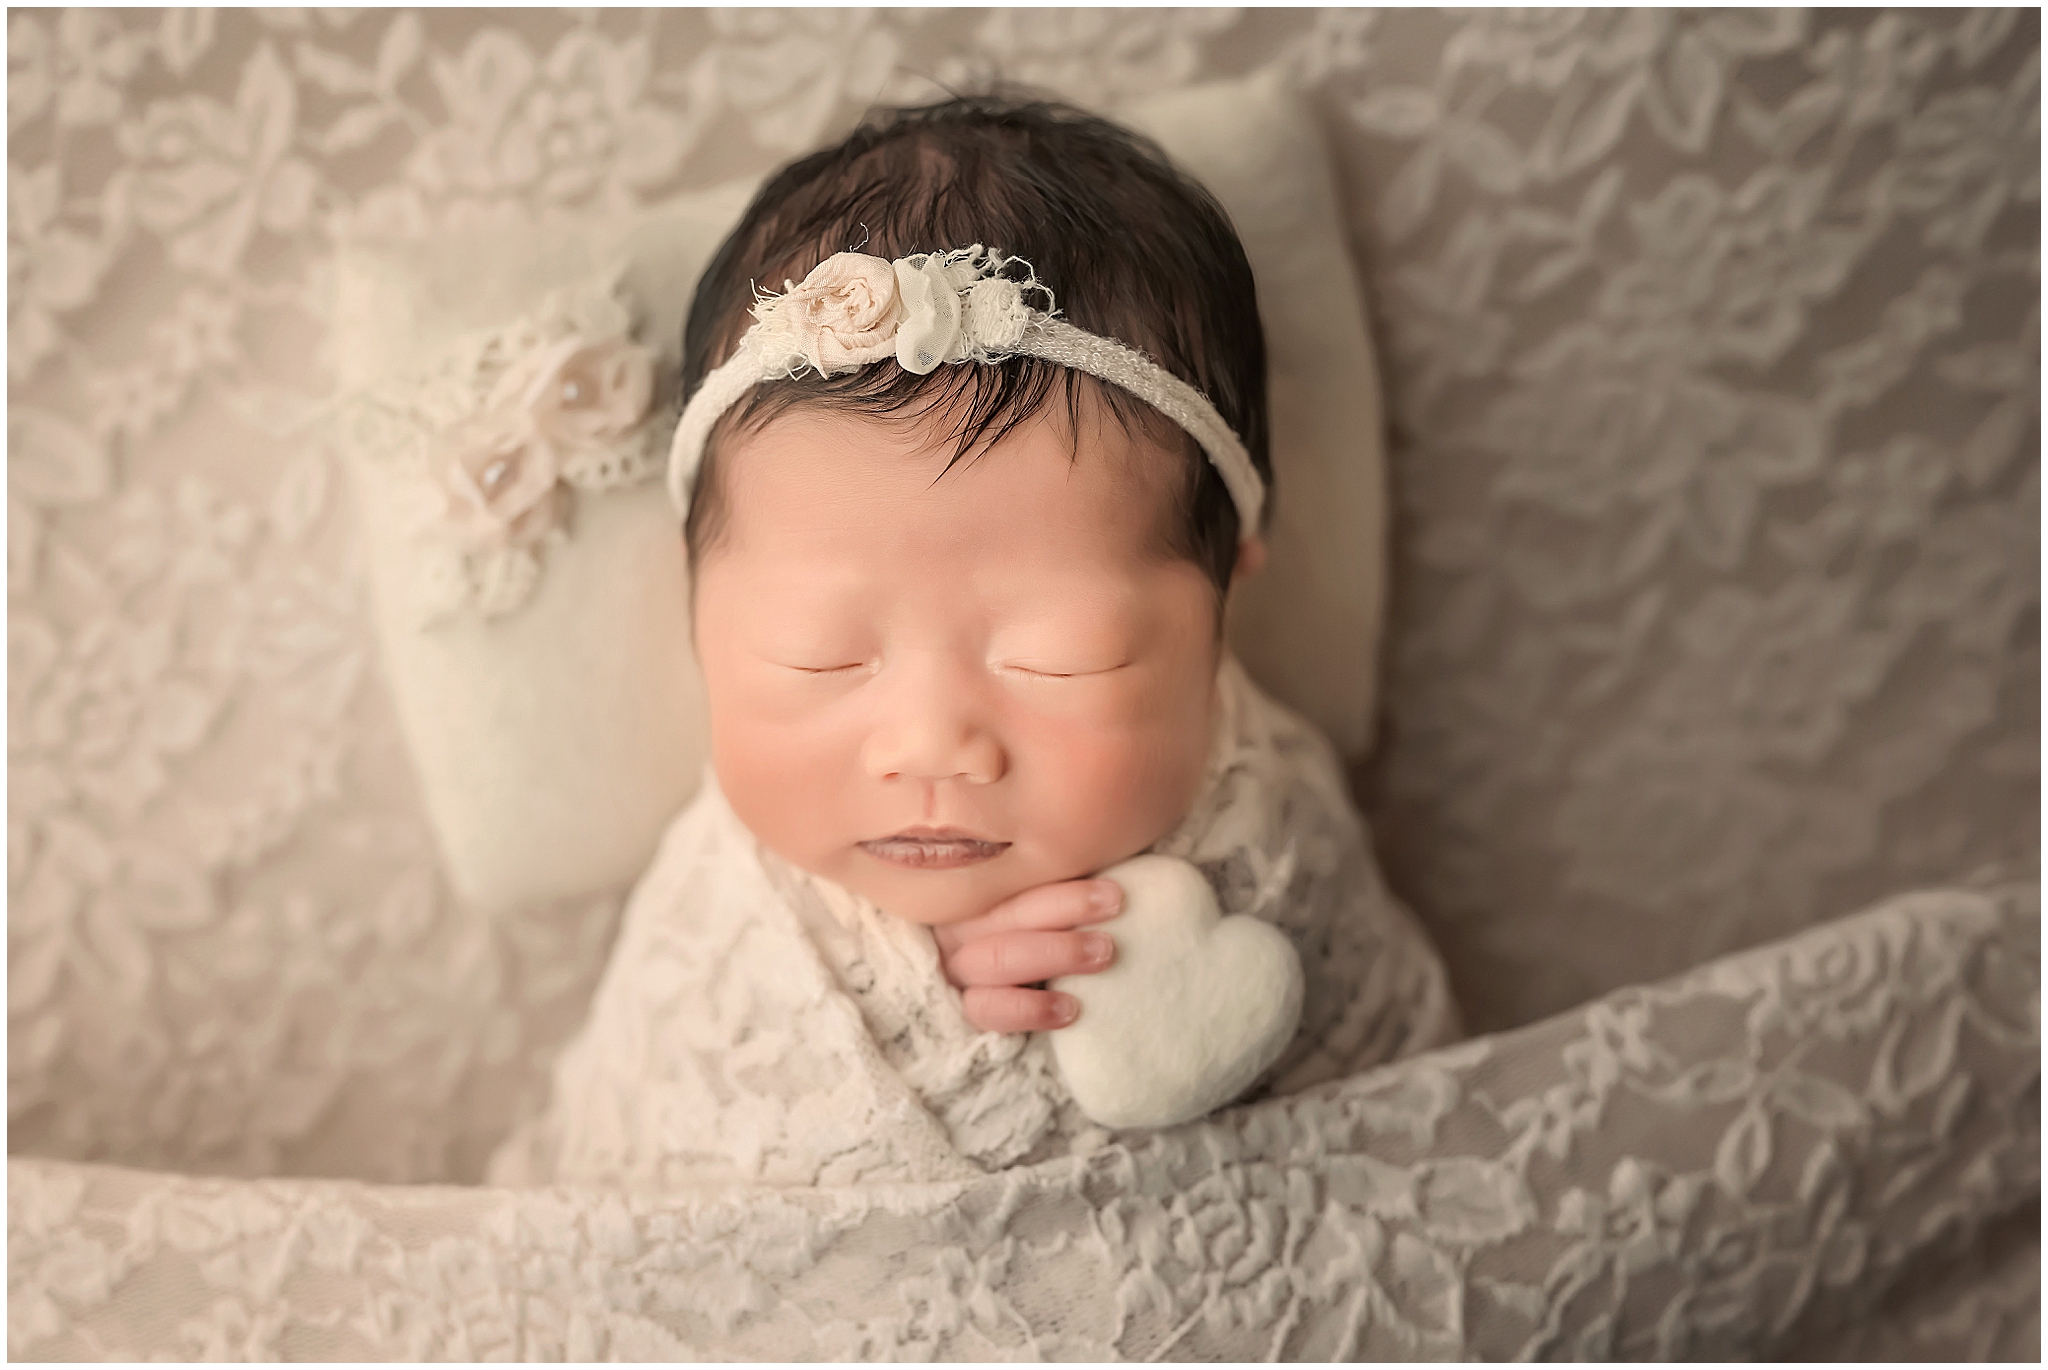 newborn baby holding a heart and sleeping during session at london ontario photography studio